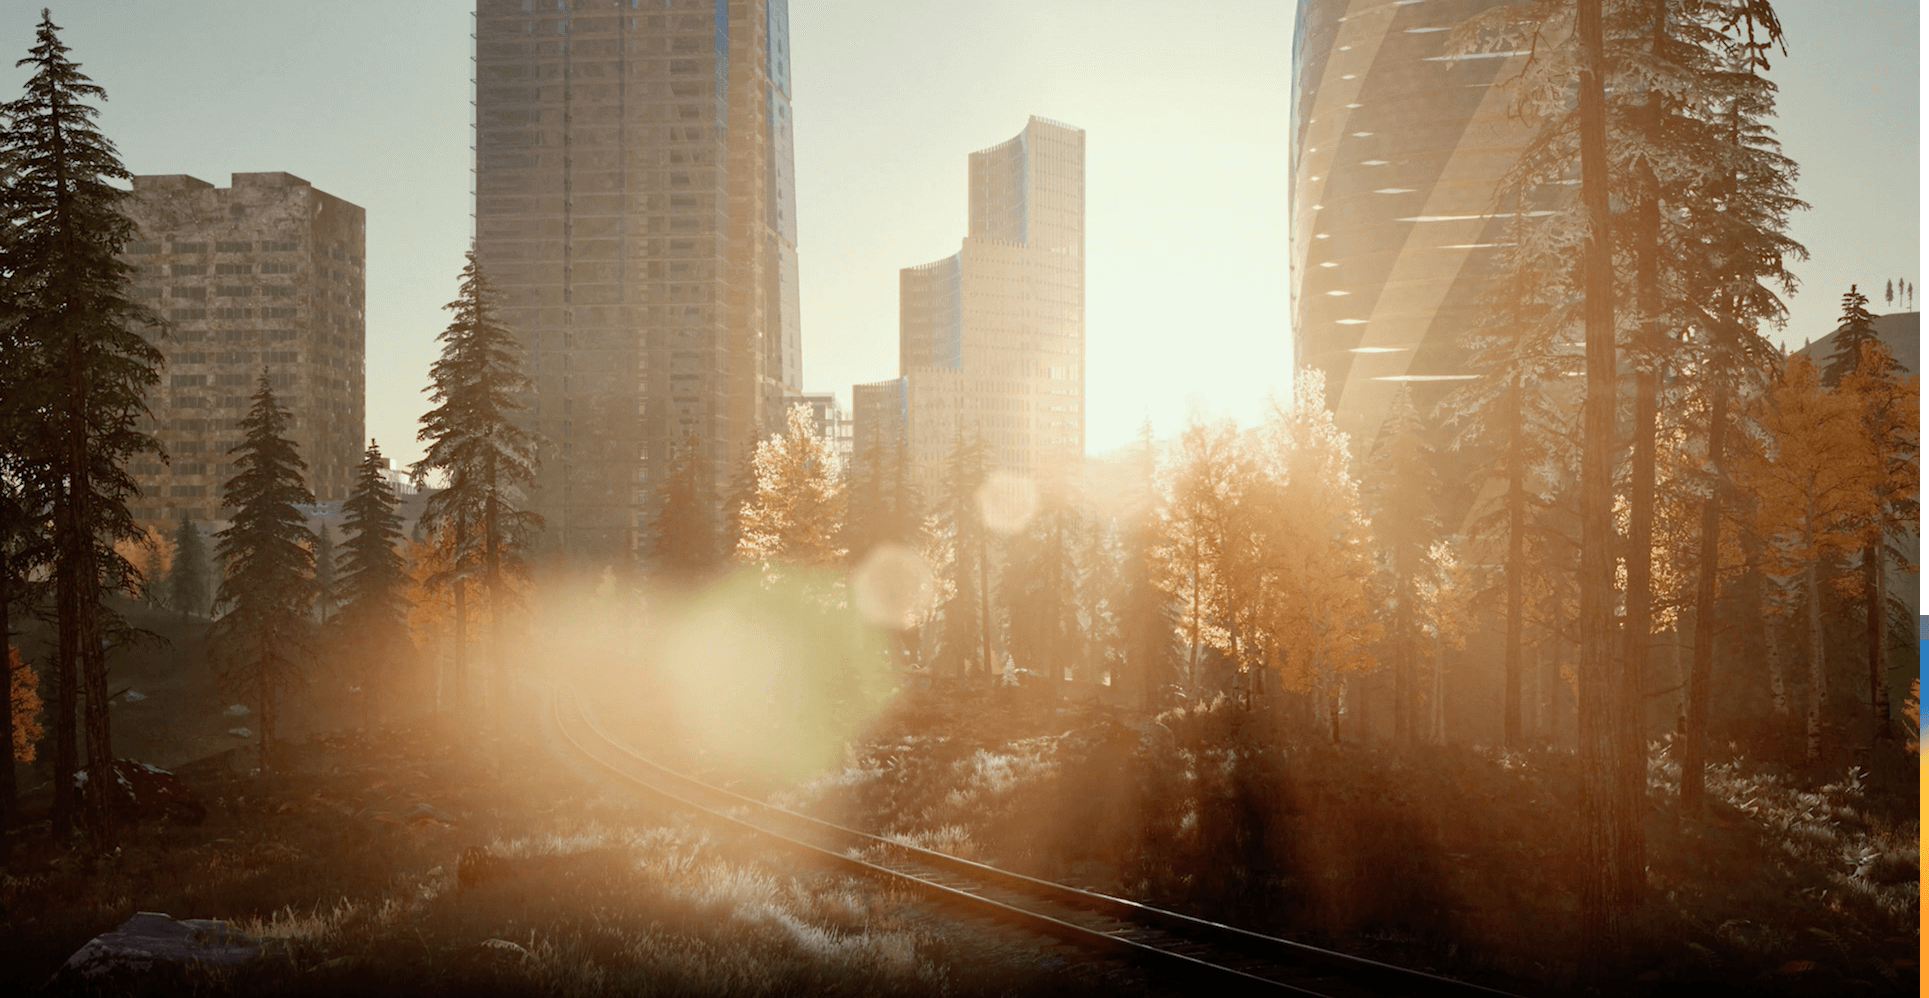 Image of city in sunlight